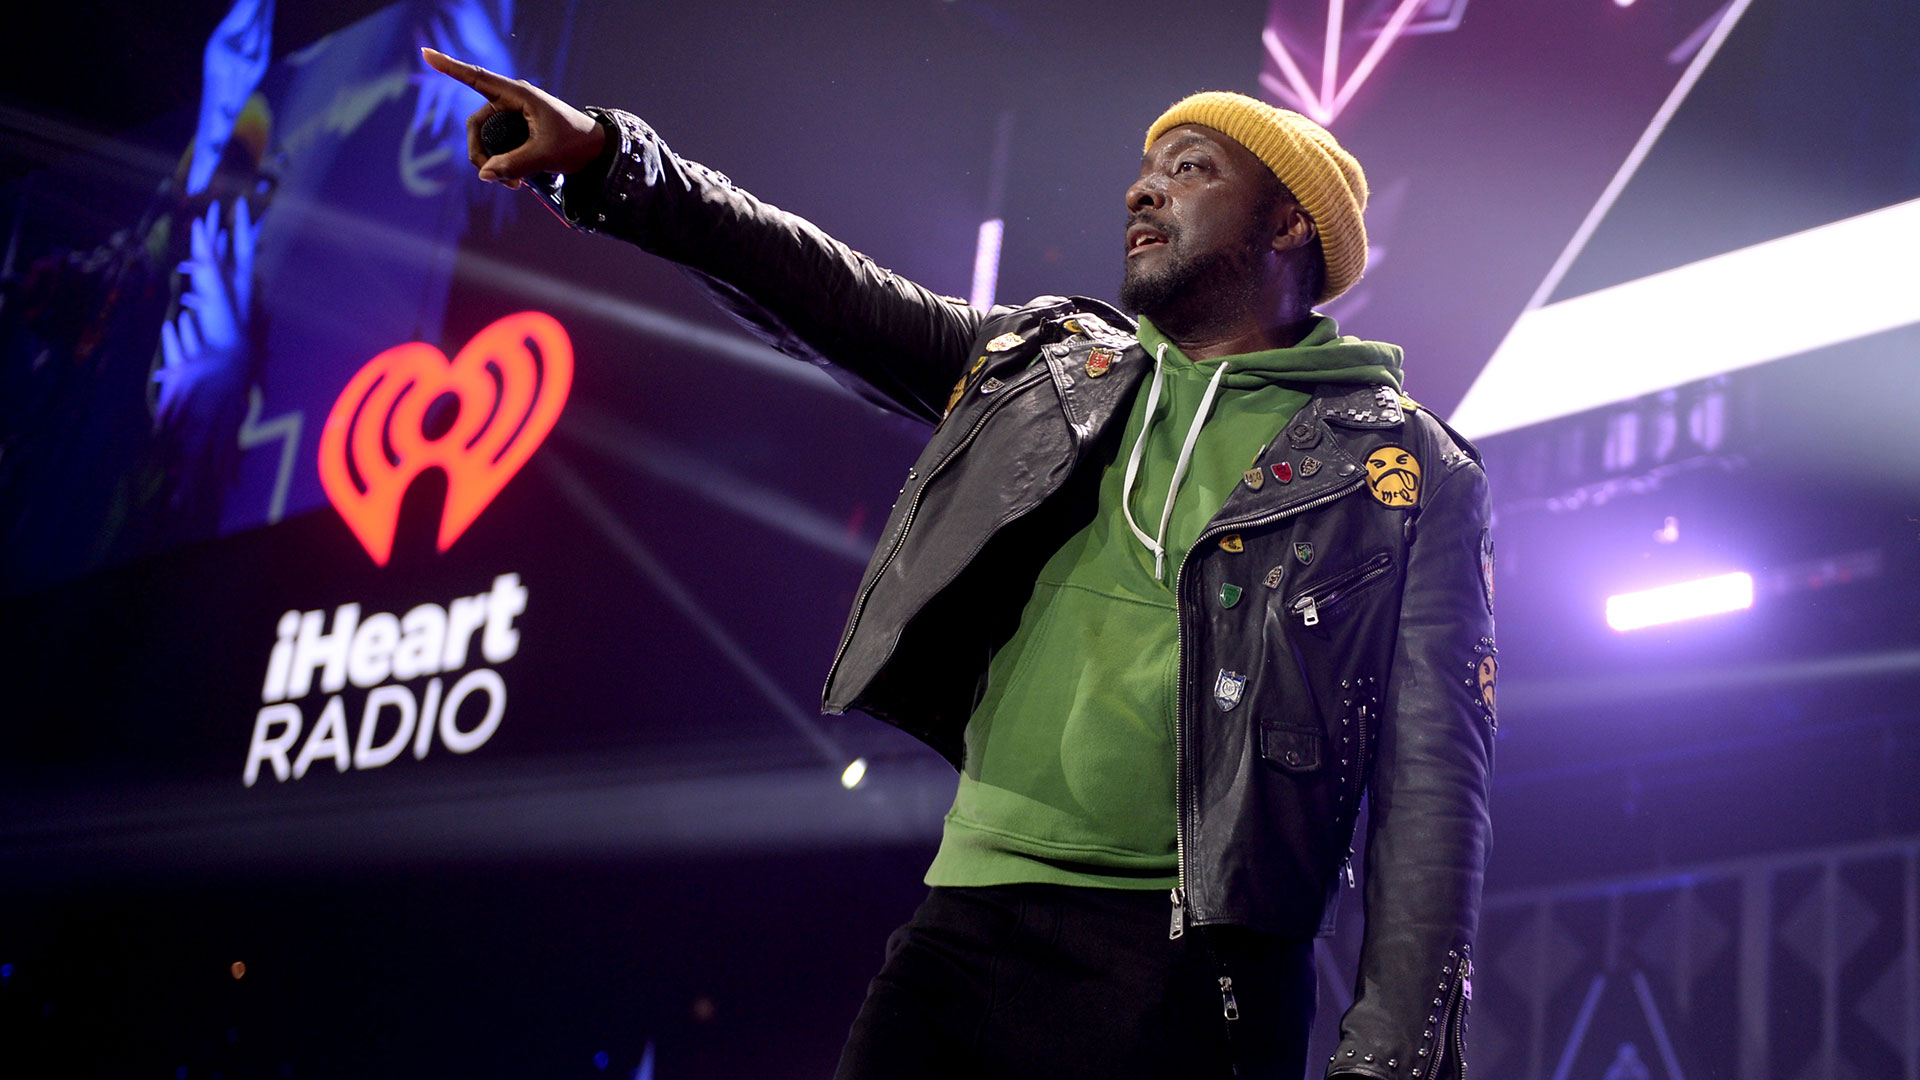 The 2022 iHeartRadio Music Festival Lineup Has Been Revealed And It's Epic!